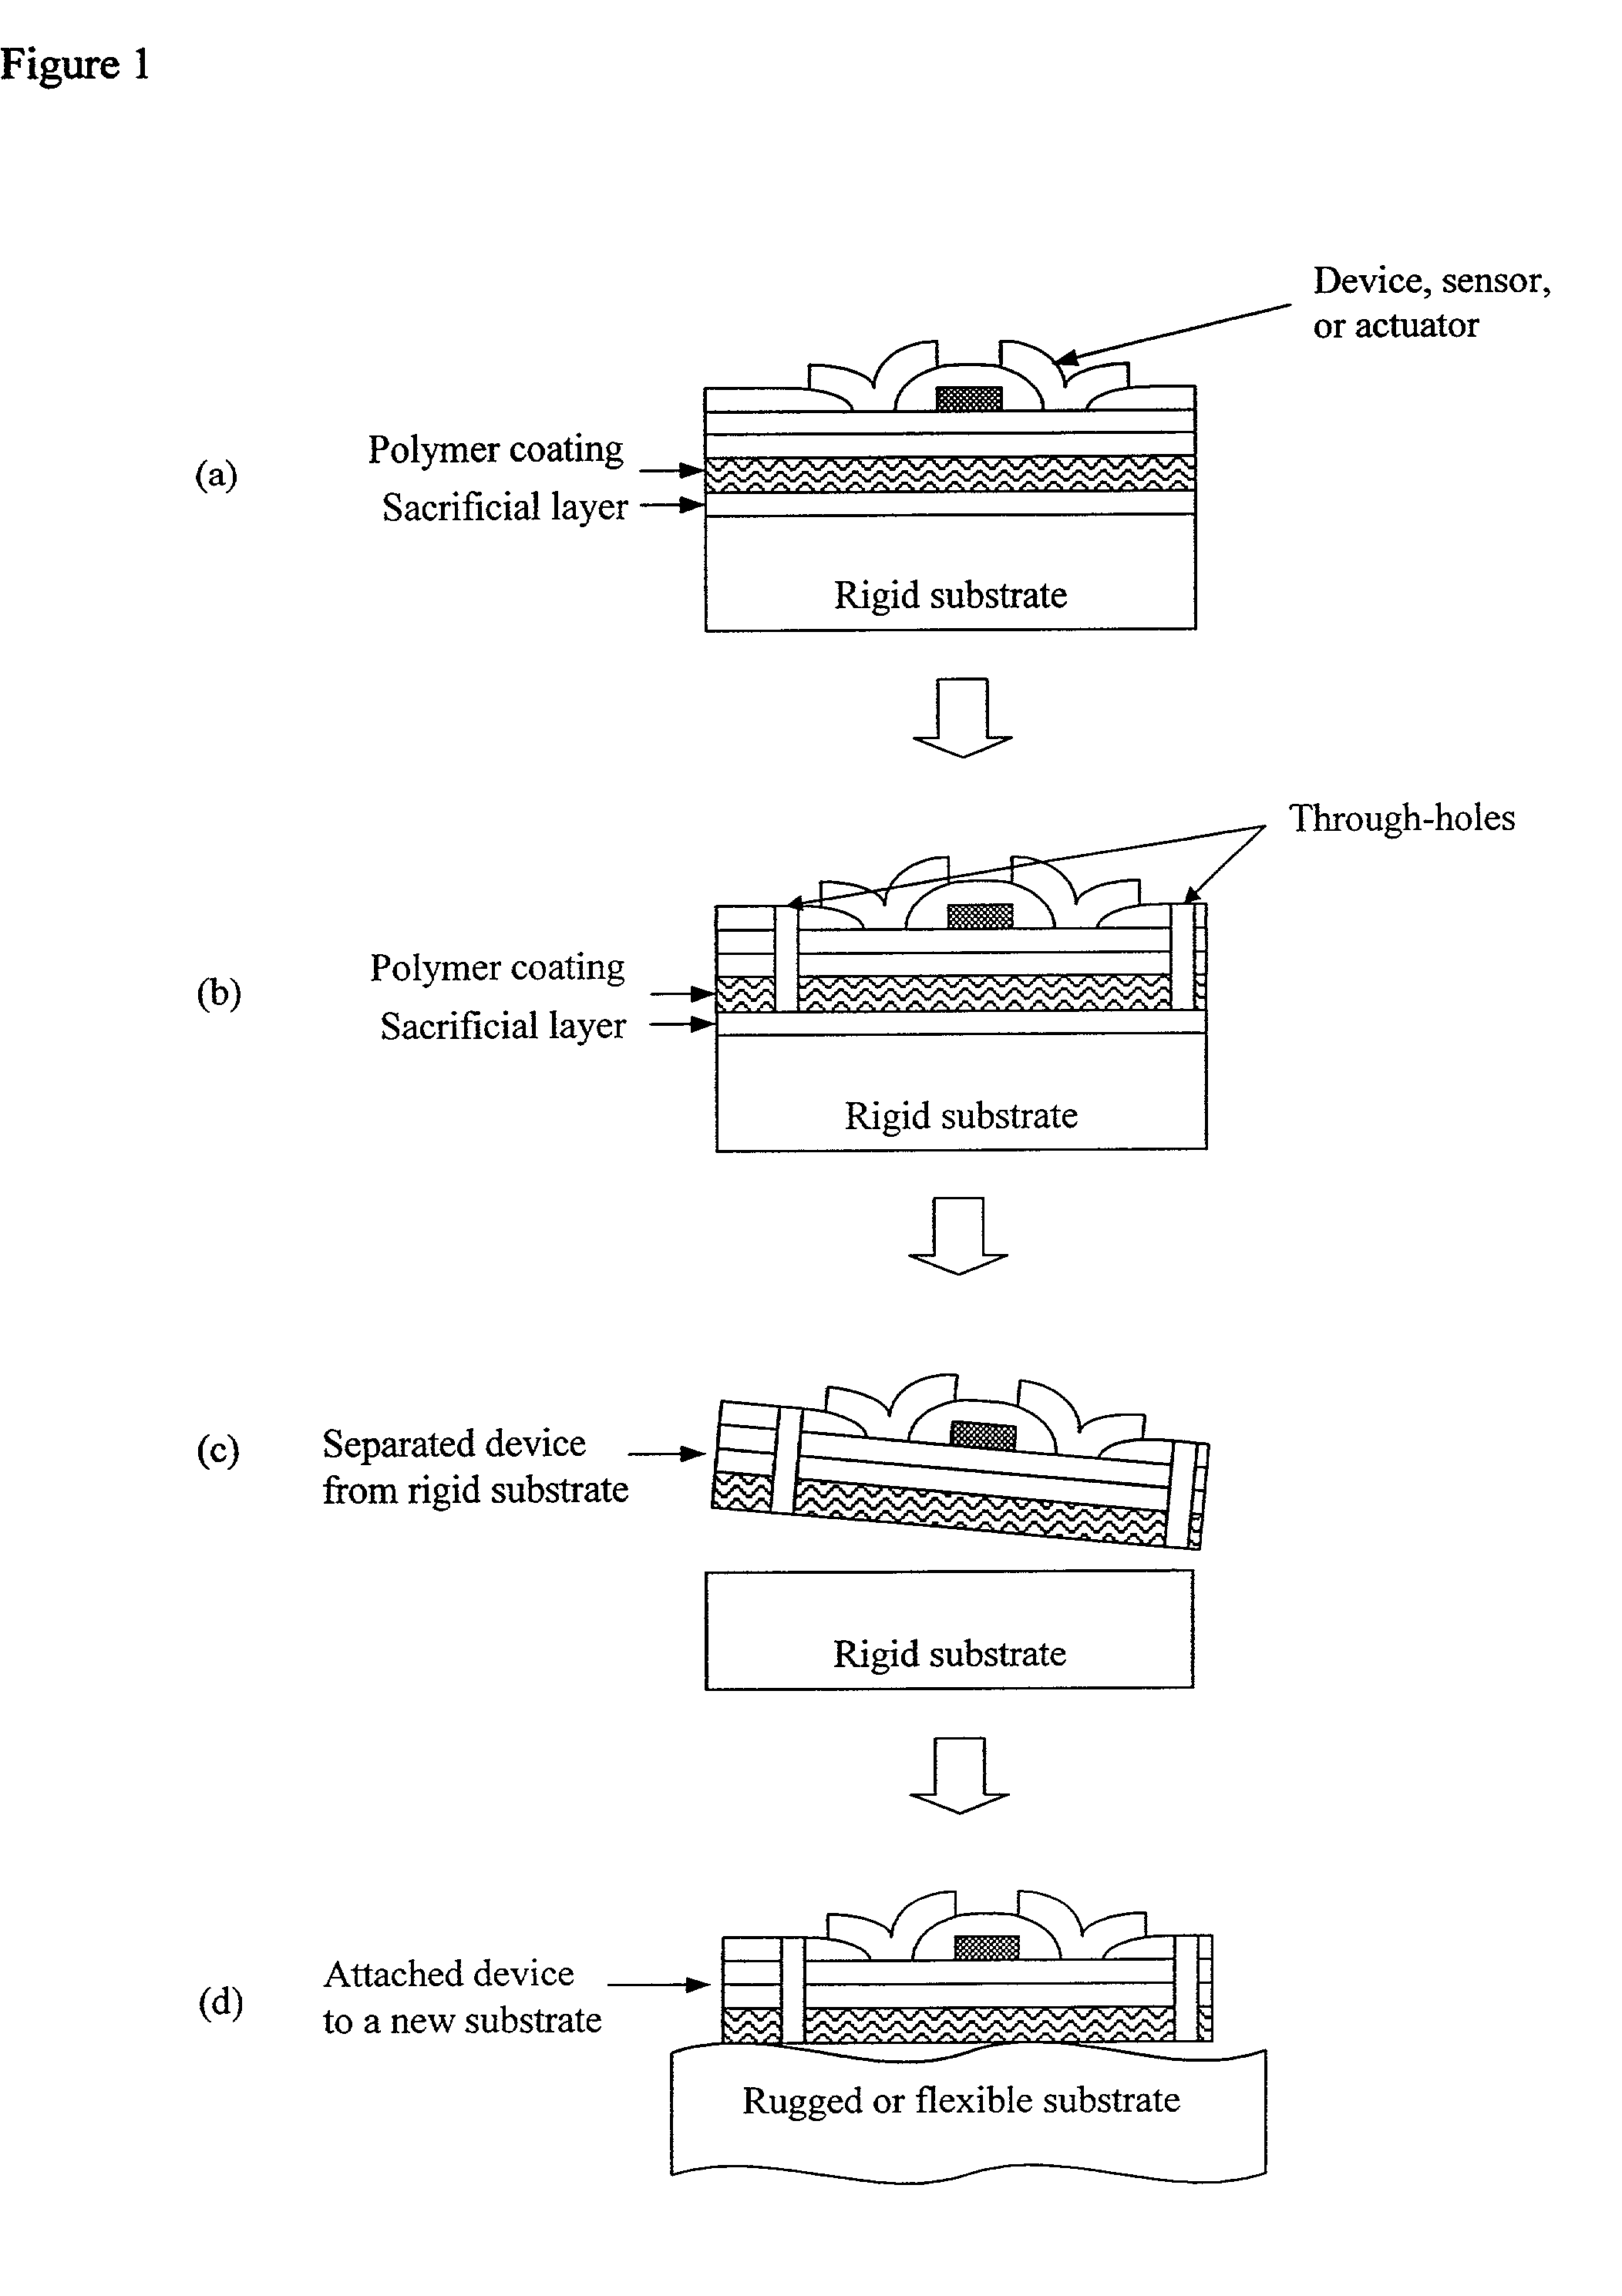 Deposited thin films and their use in separation and sacrificial layer applications